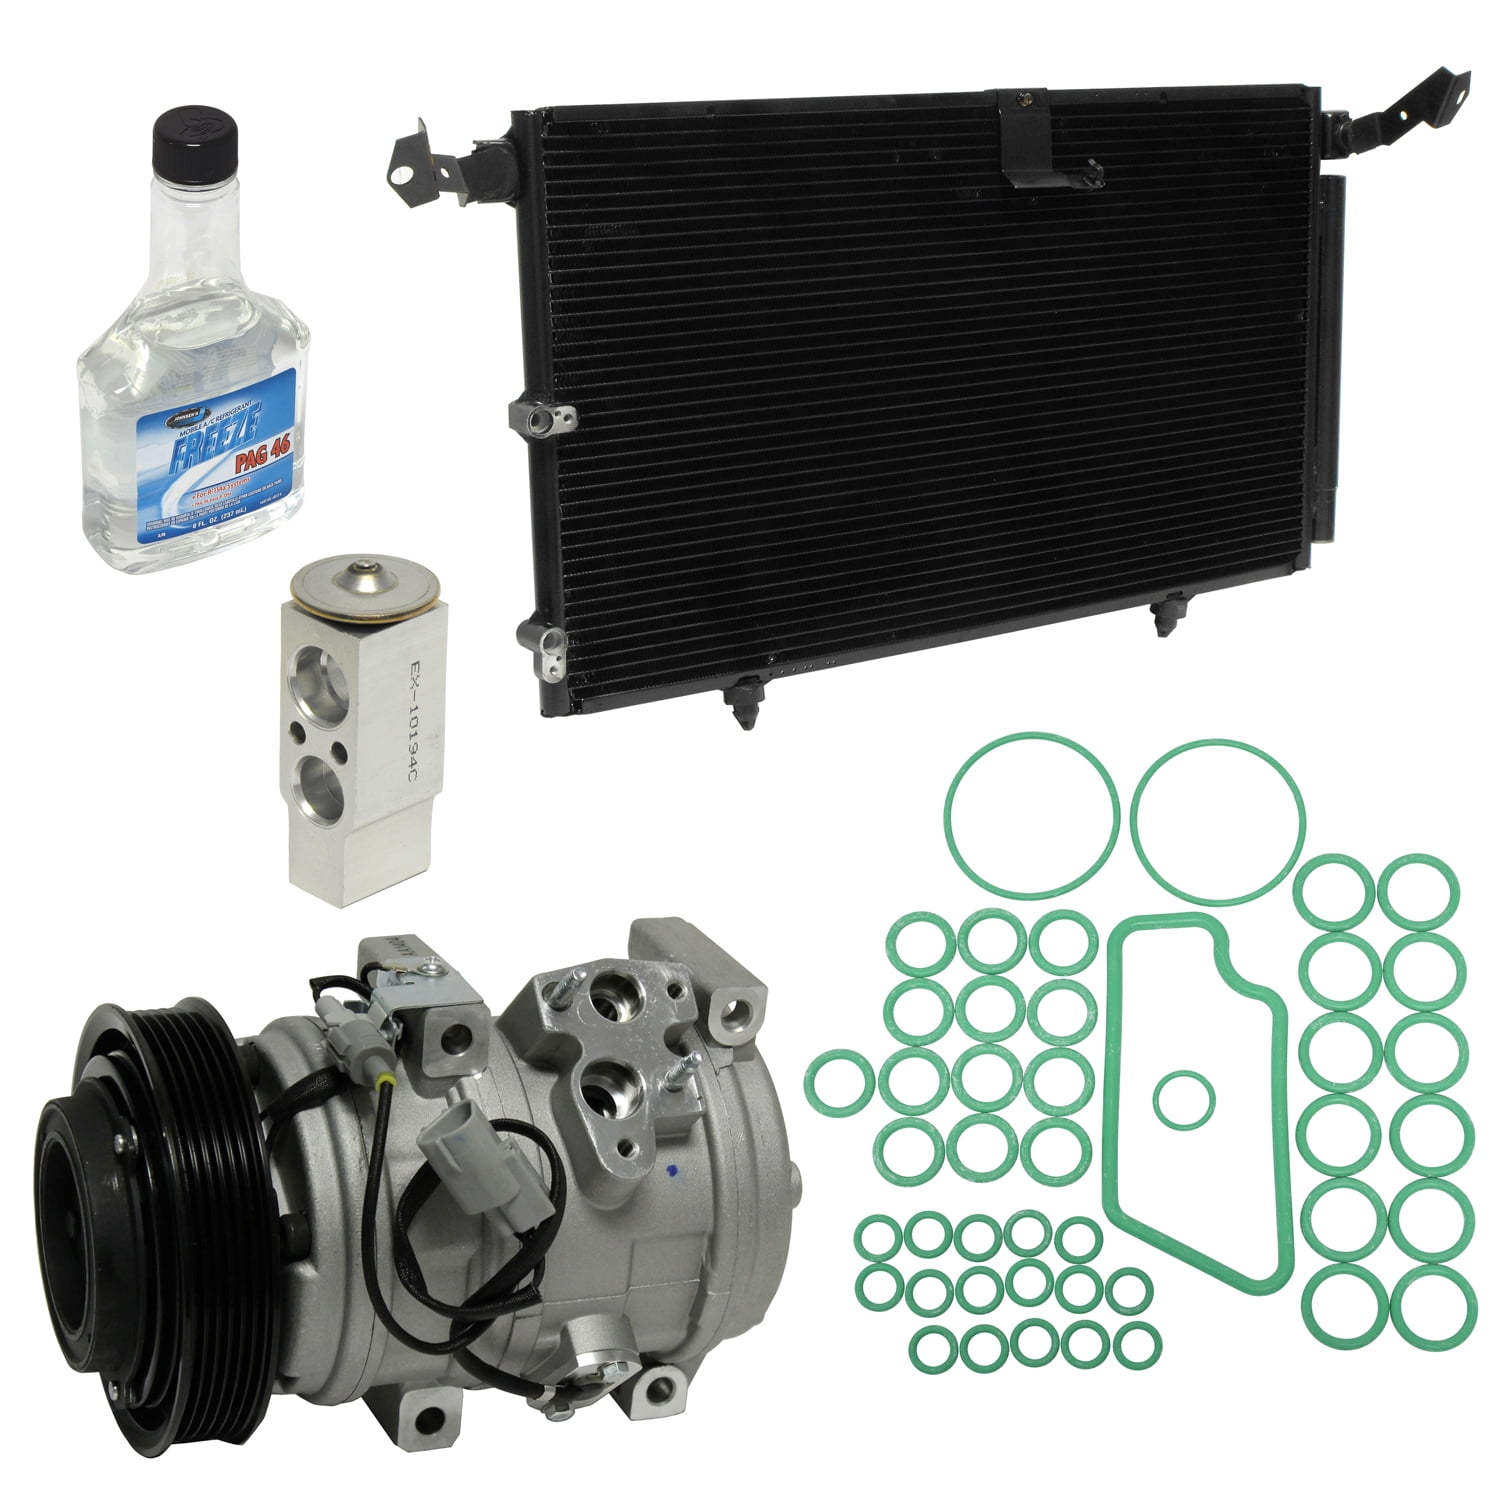 New A/C Compressor and Component Kit for RX300